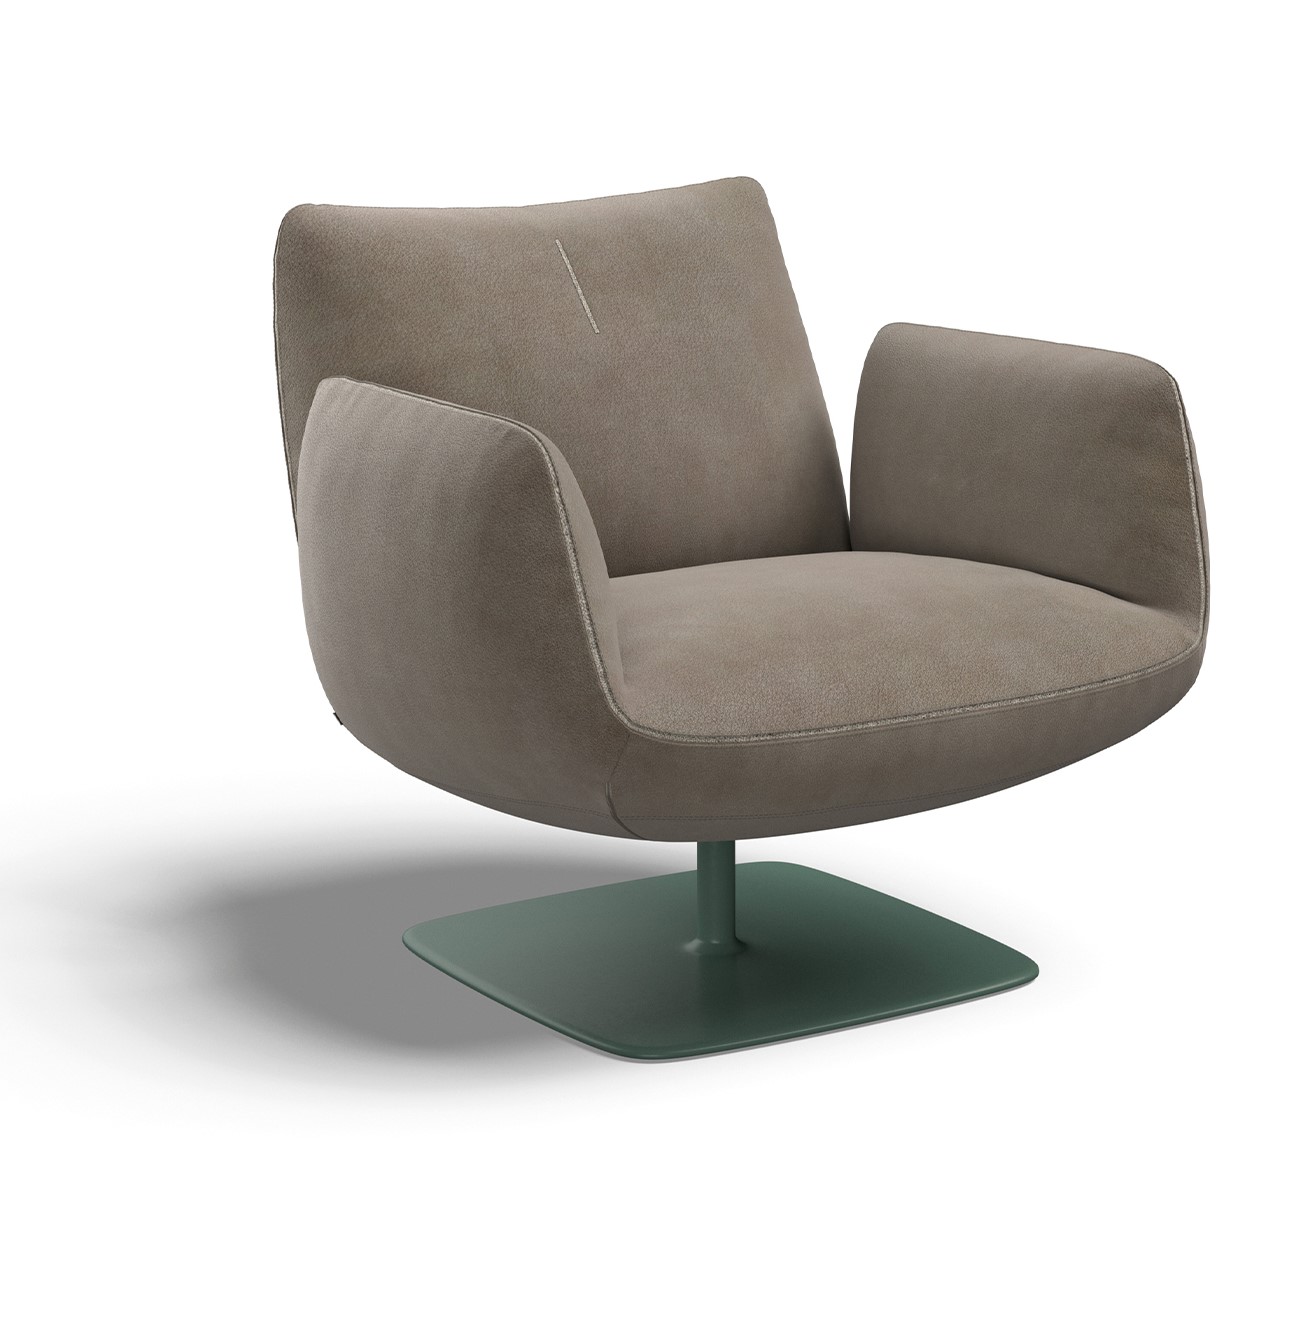 Jalis Club Chair Product Image